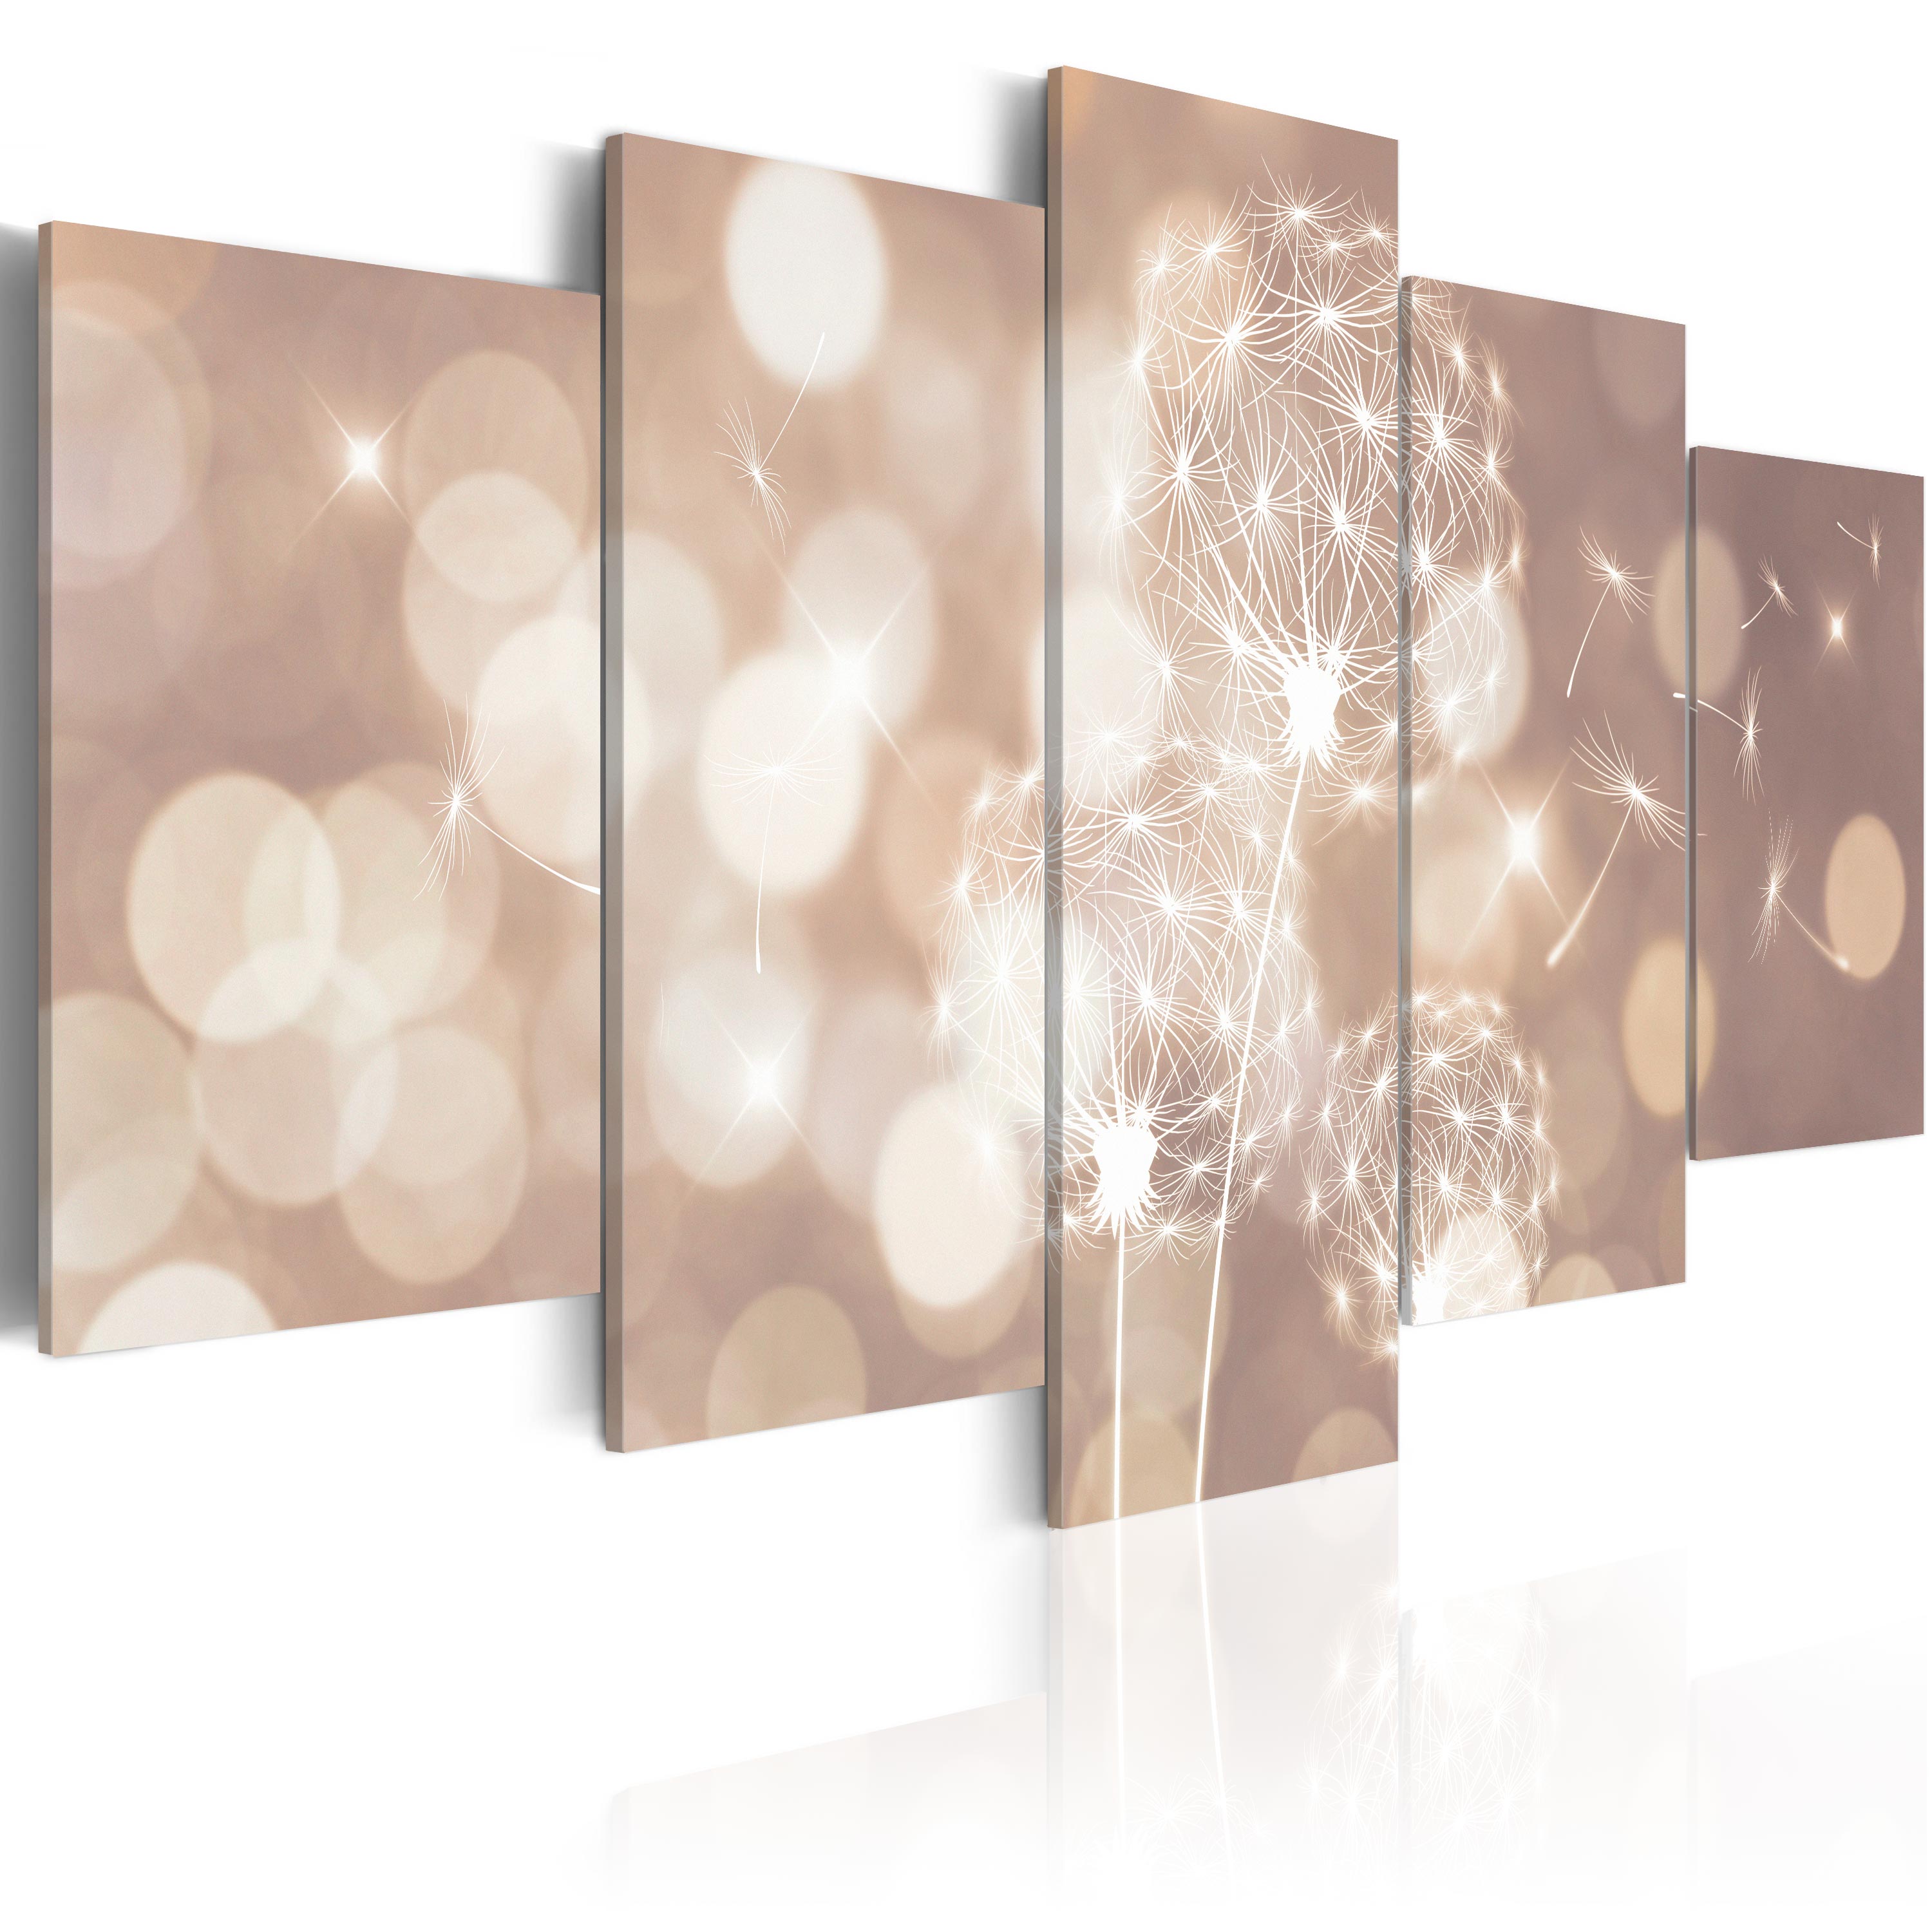 Canvas Print - Gifts of Light - 200x100